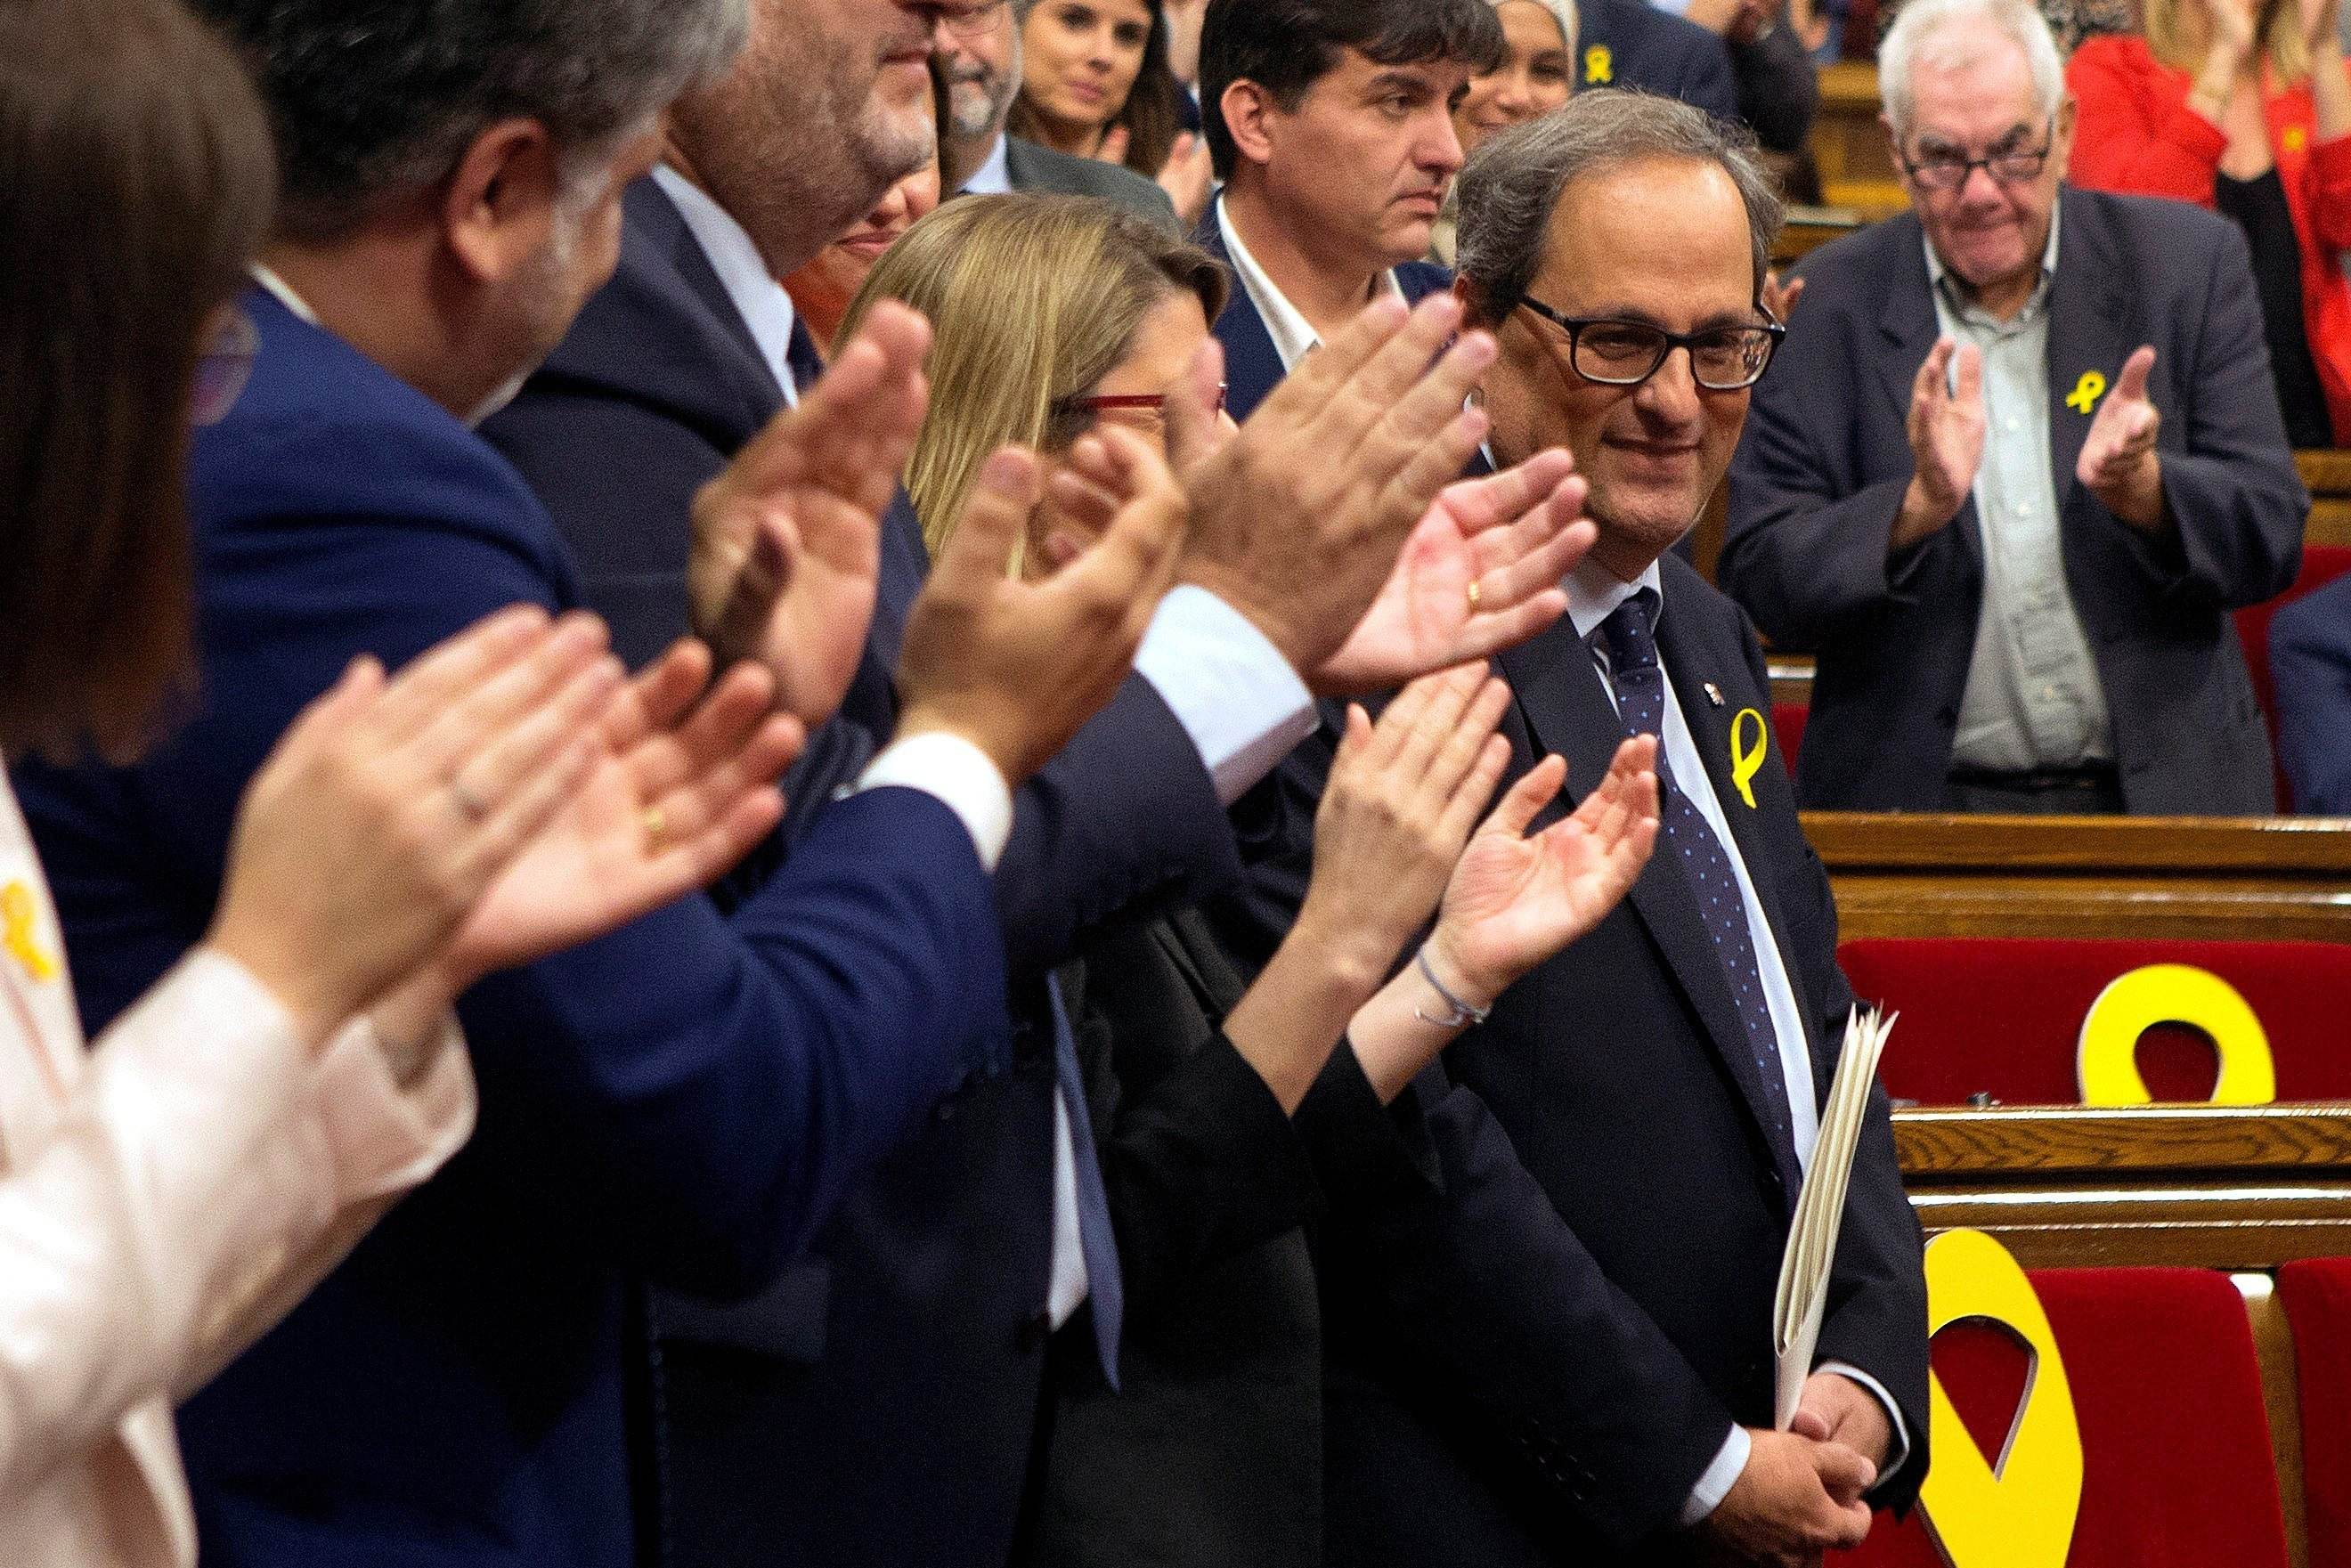 Torra promises to work tirelessly for the Catalan Republic and its Constitution